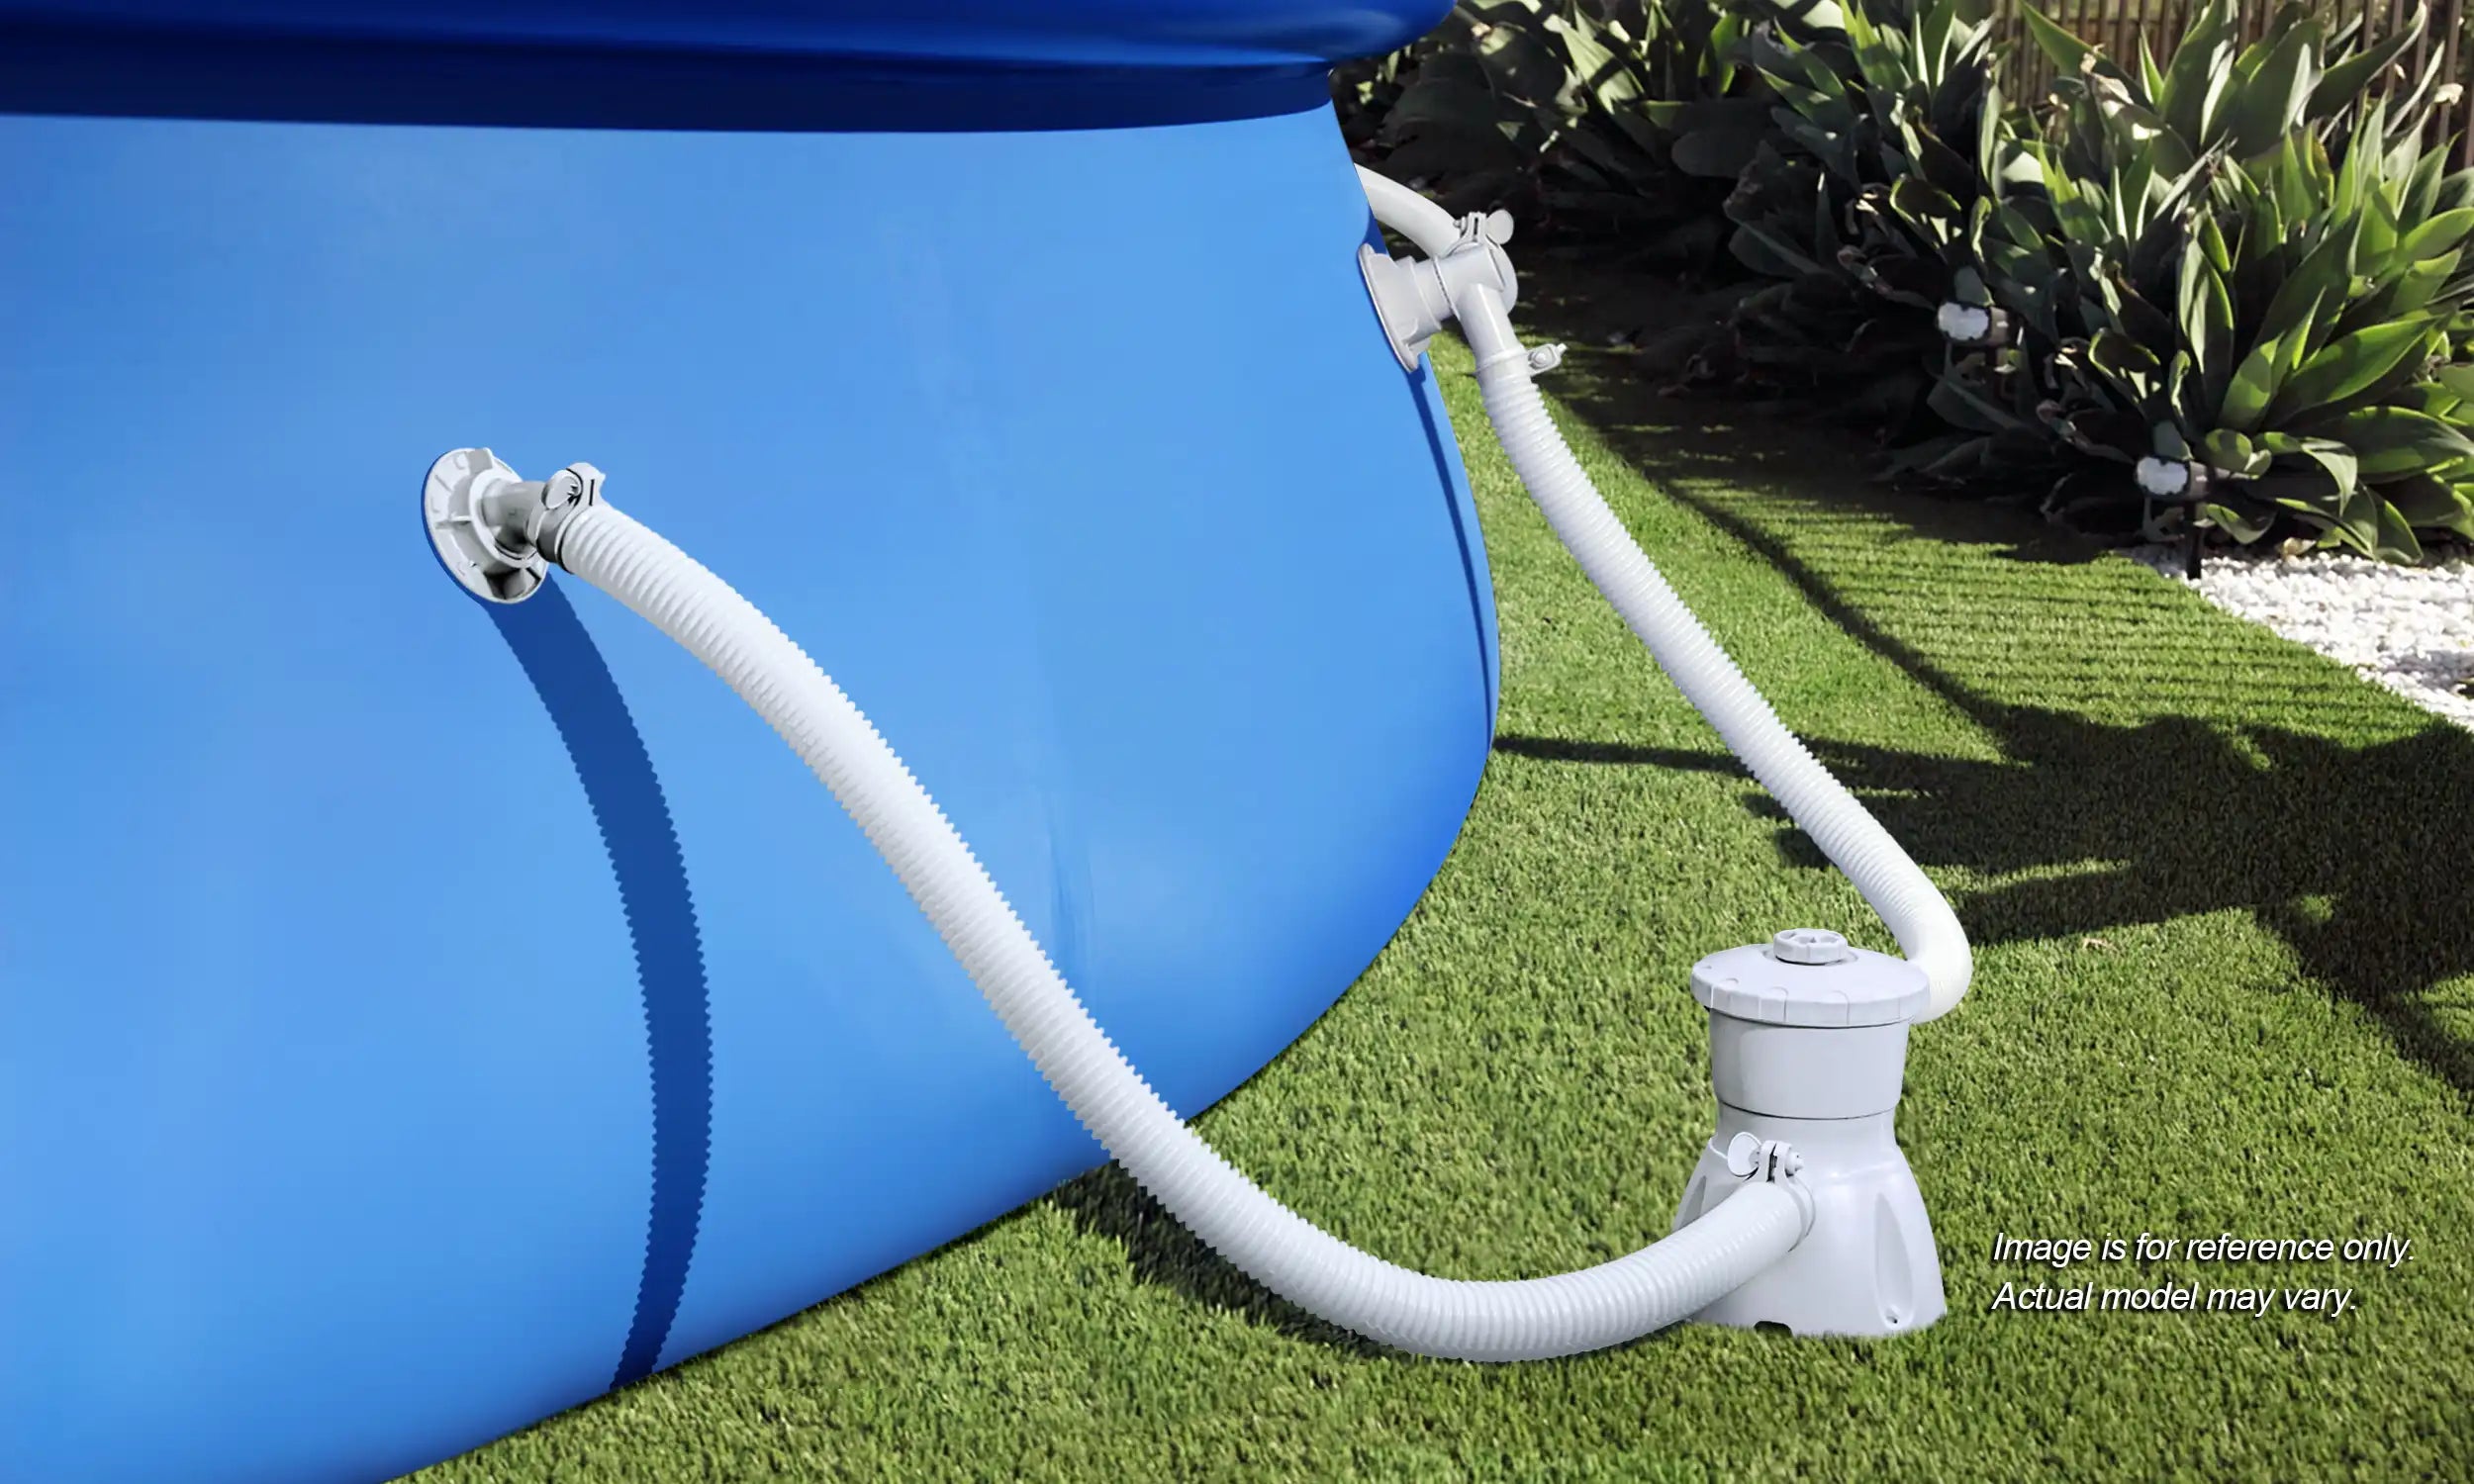 Funsicle RX330 Cartridge Filter Pump attached to a pool on grass ground